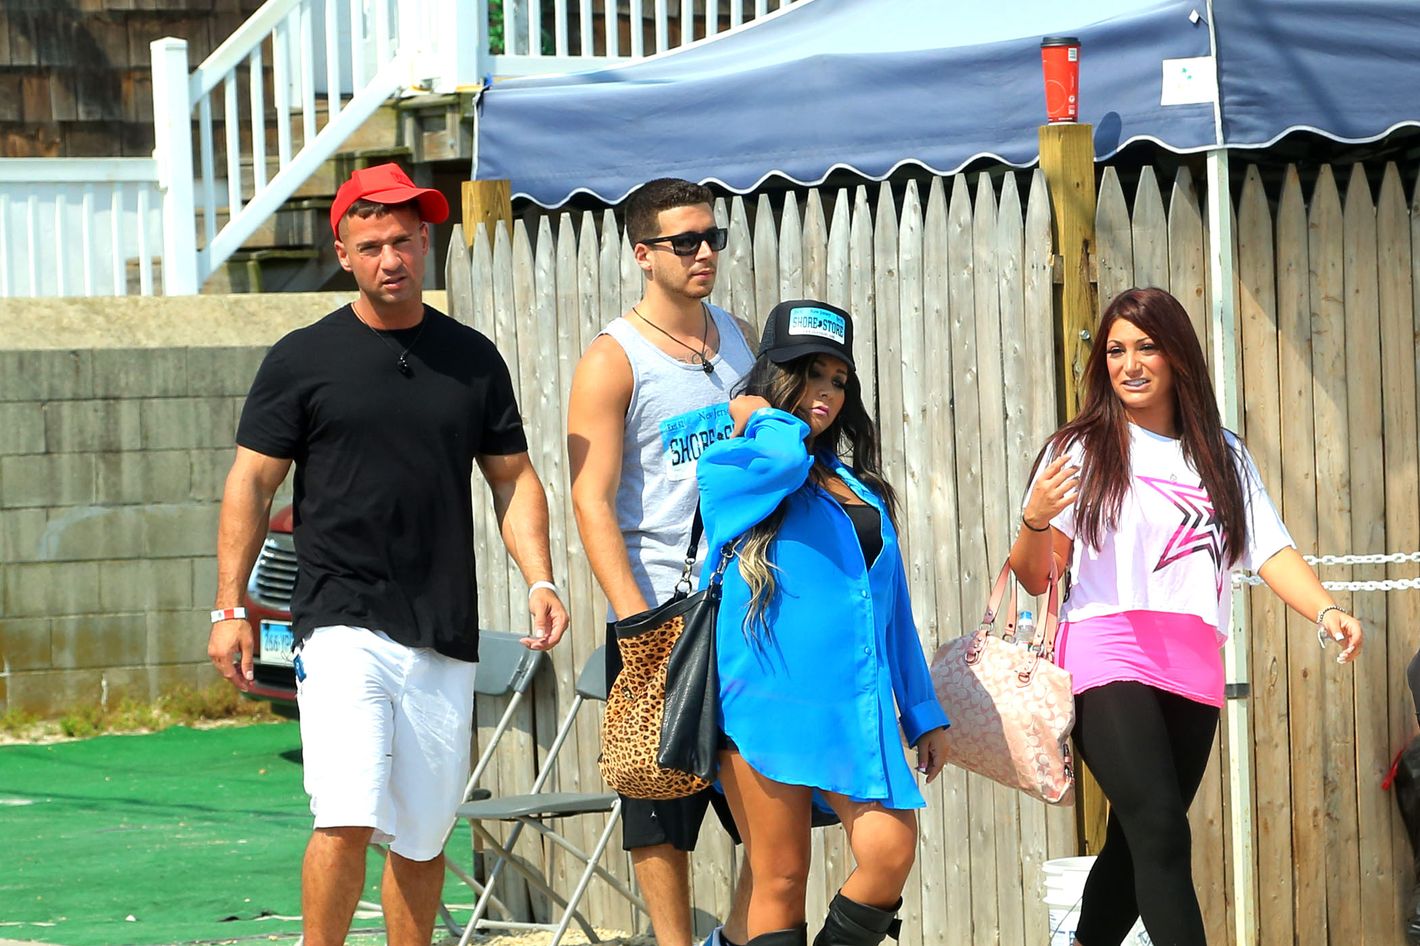 Best Outfits From 'Jersey Shore